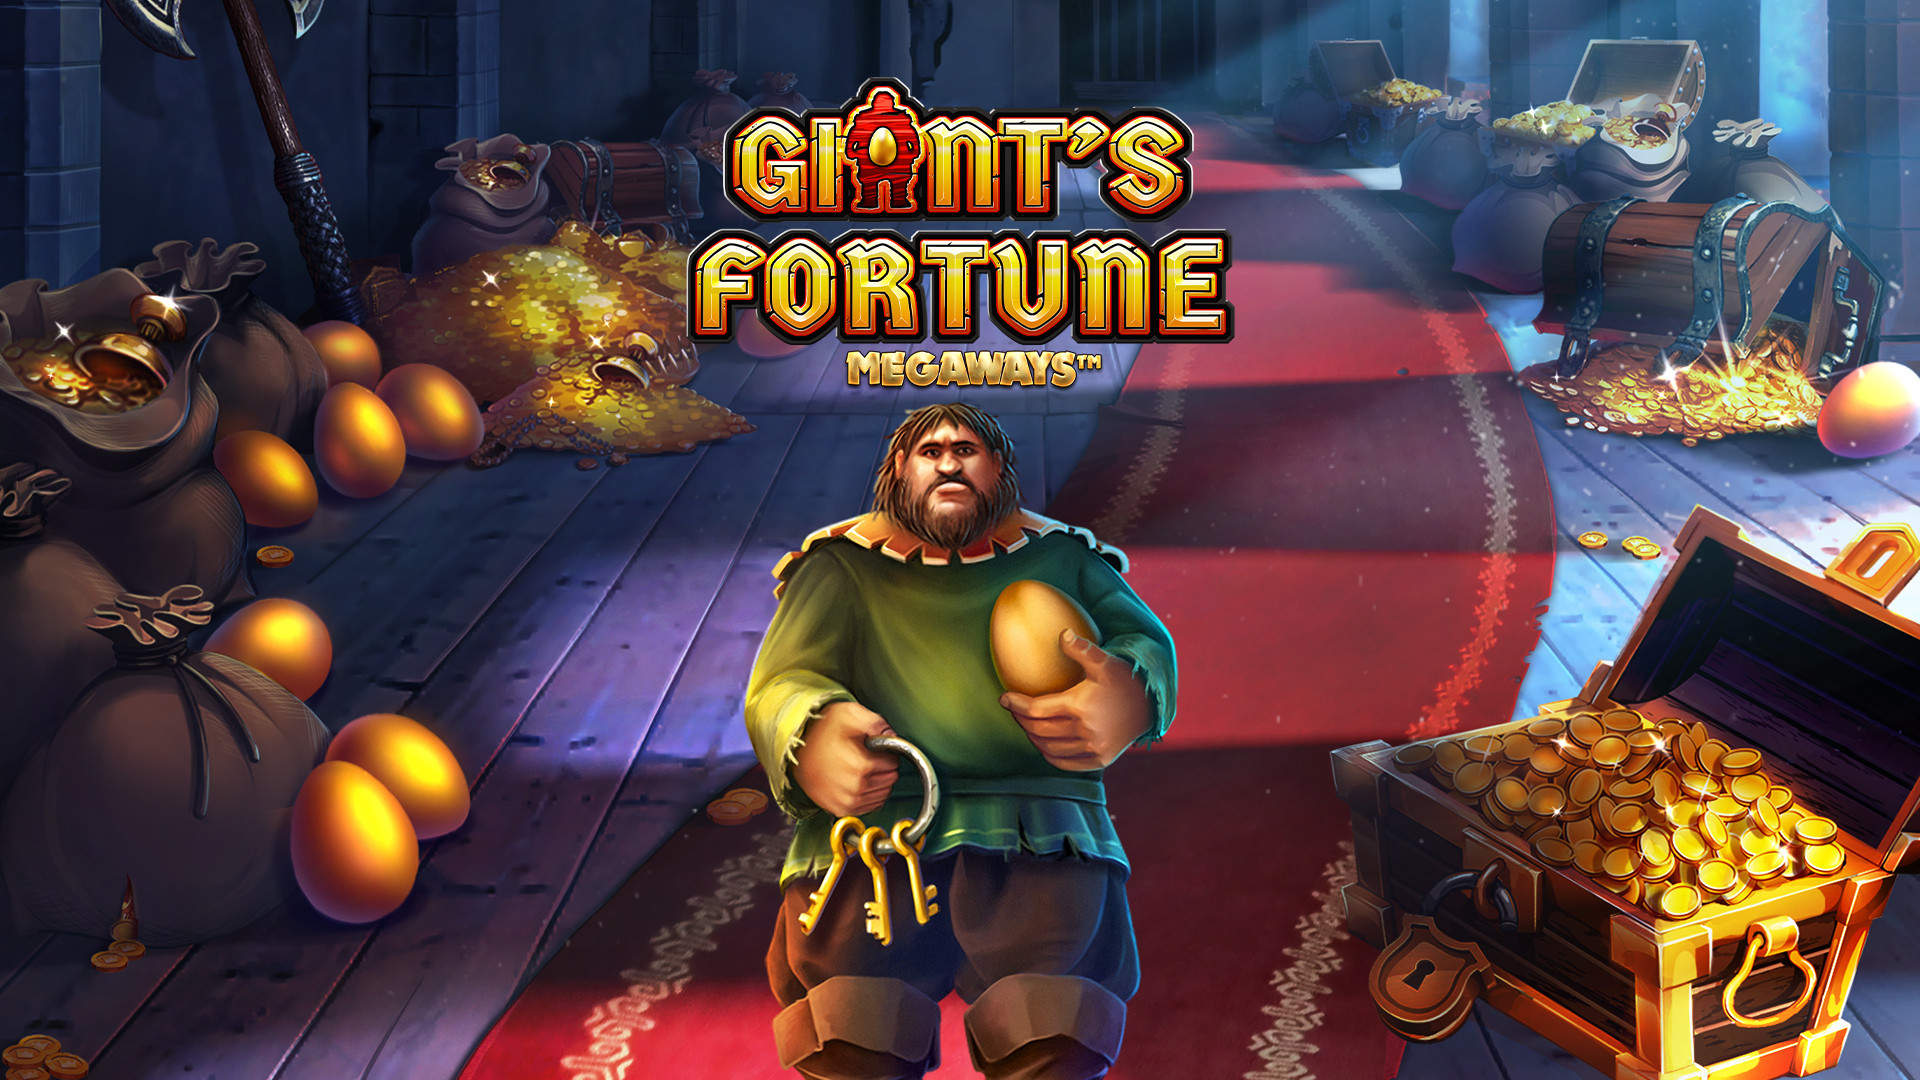 Giant's Fortune MEGAWAYS